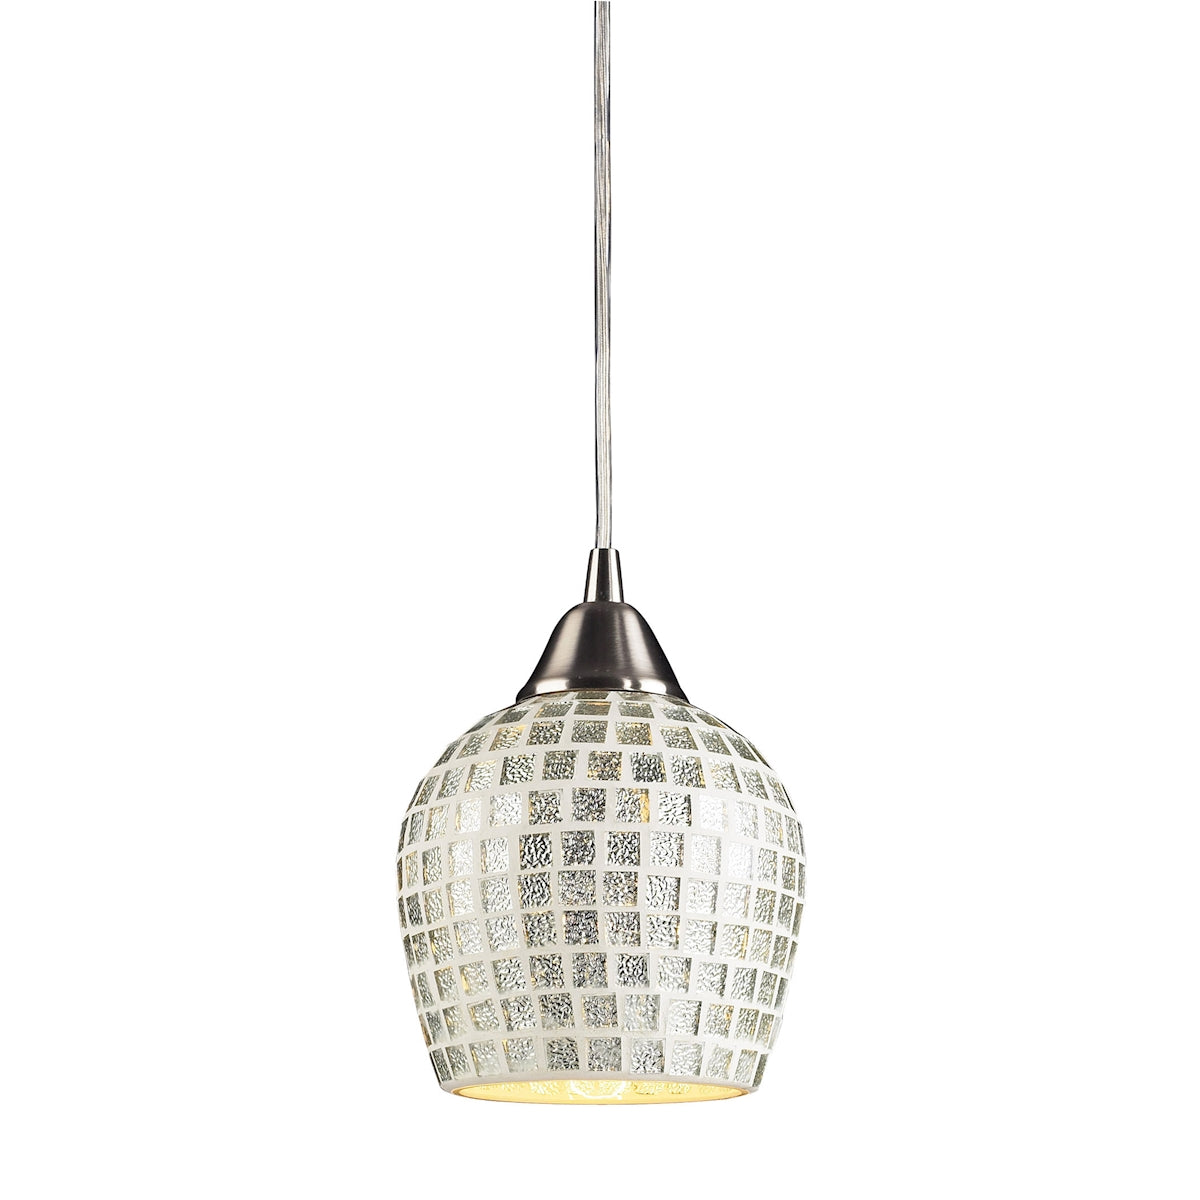 Fusion 1-Light Mini Pendant in Satin Nickel with Silver Mosaic Glass